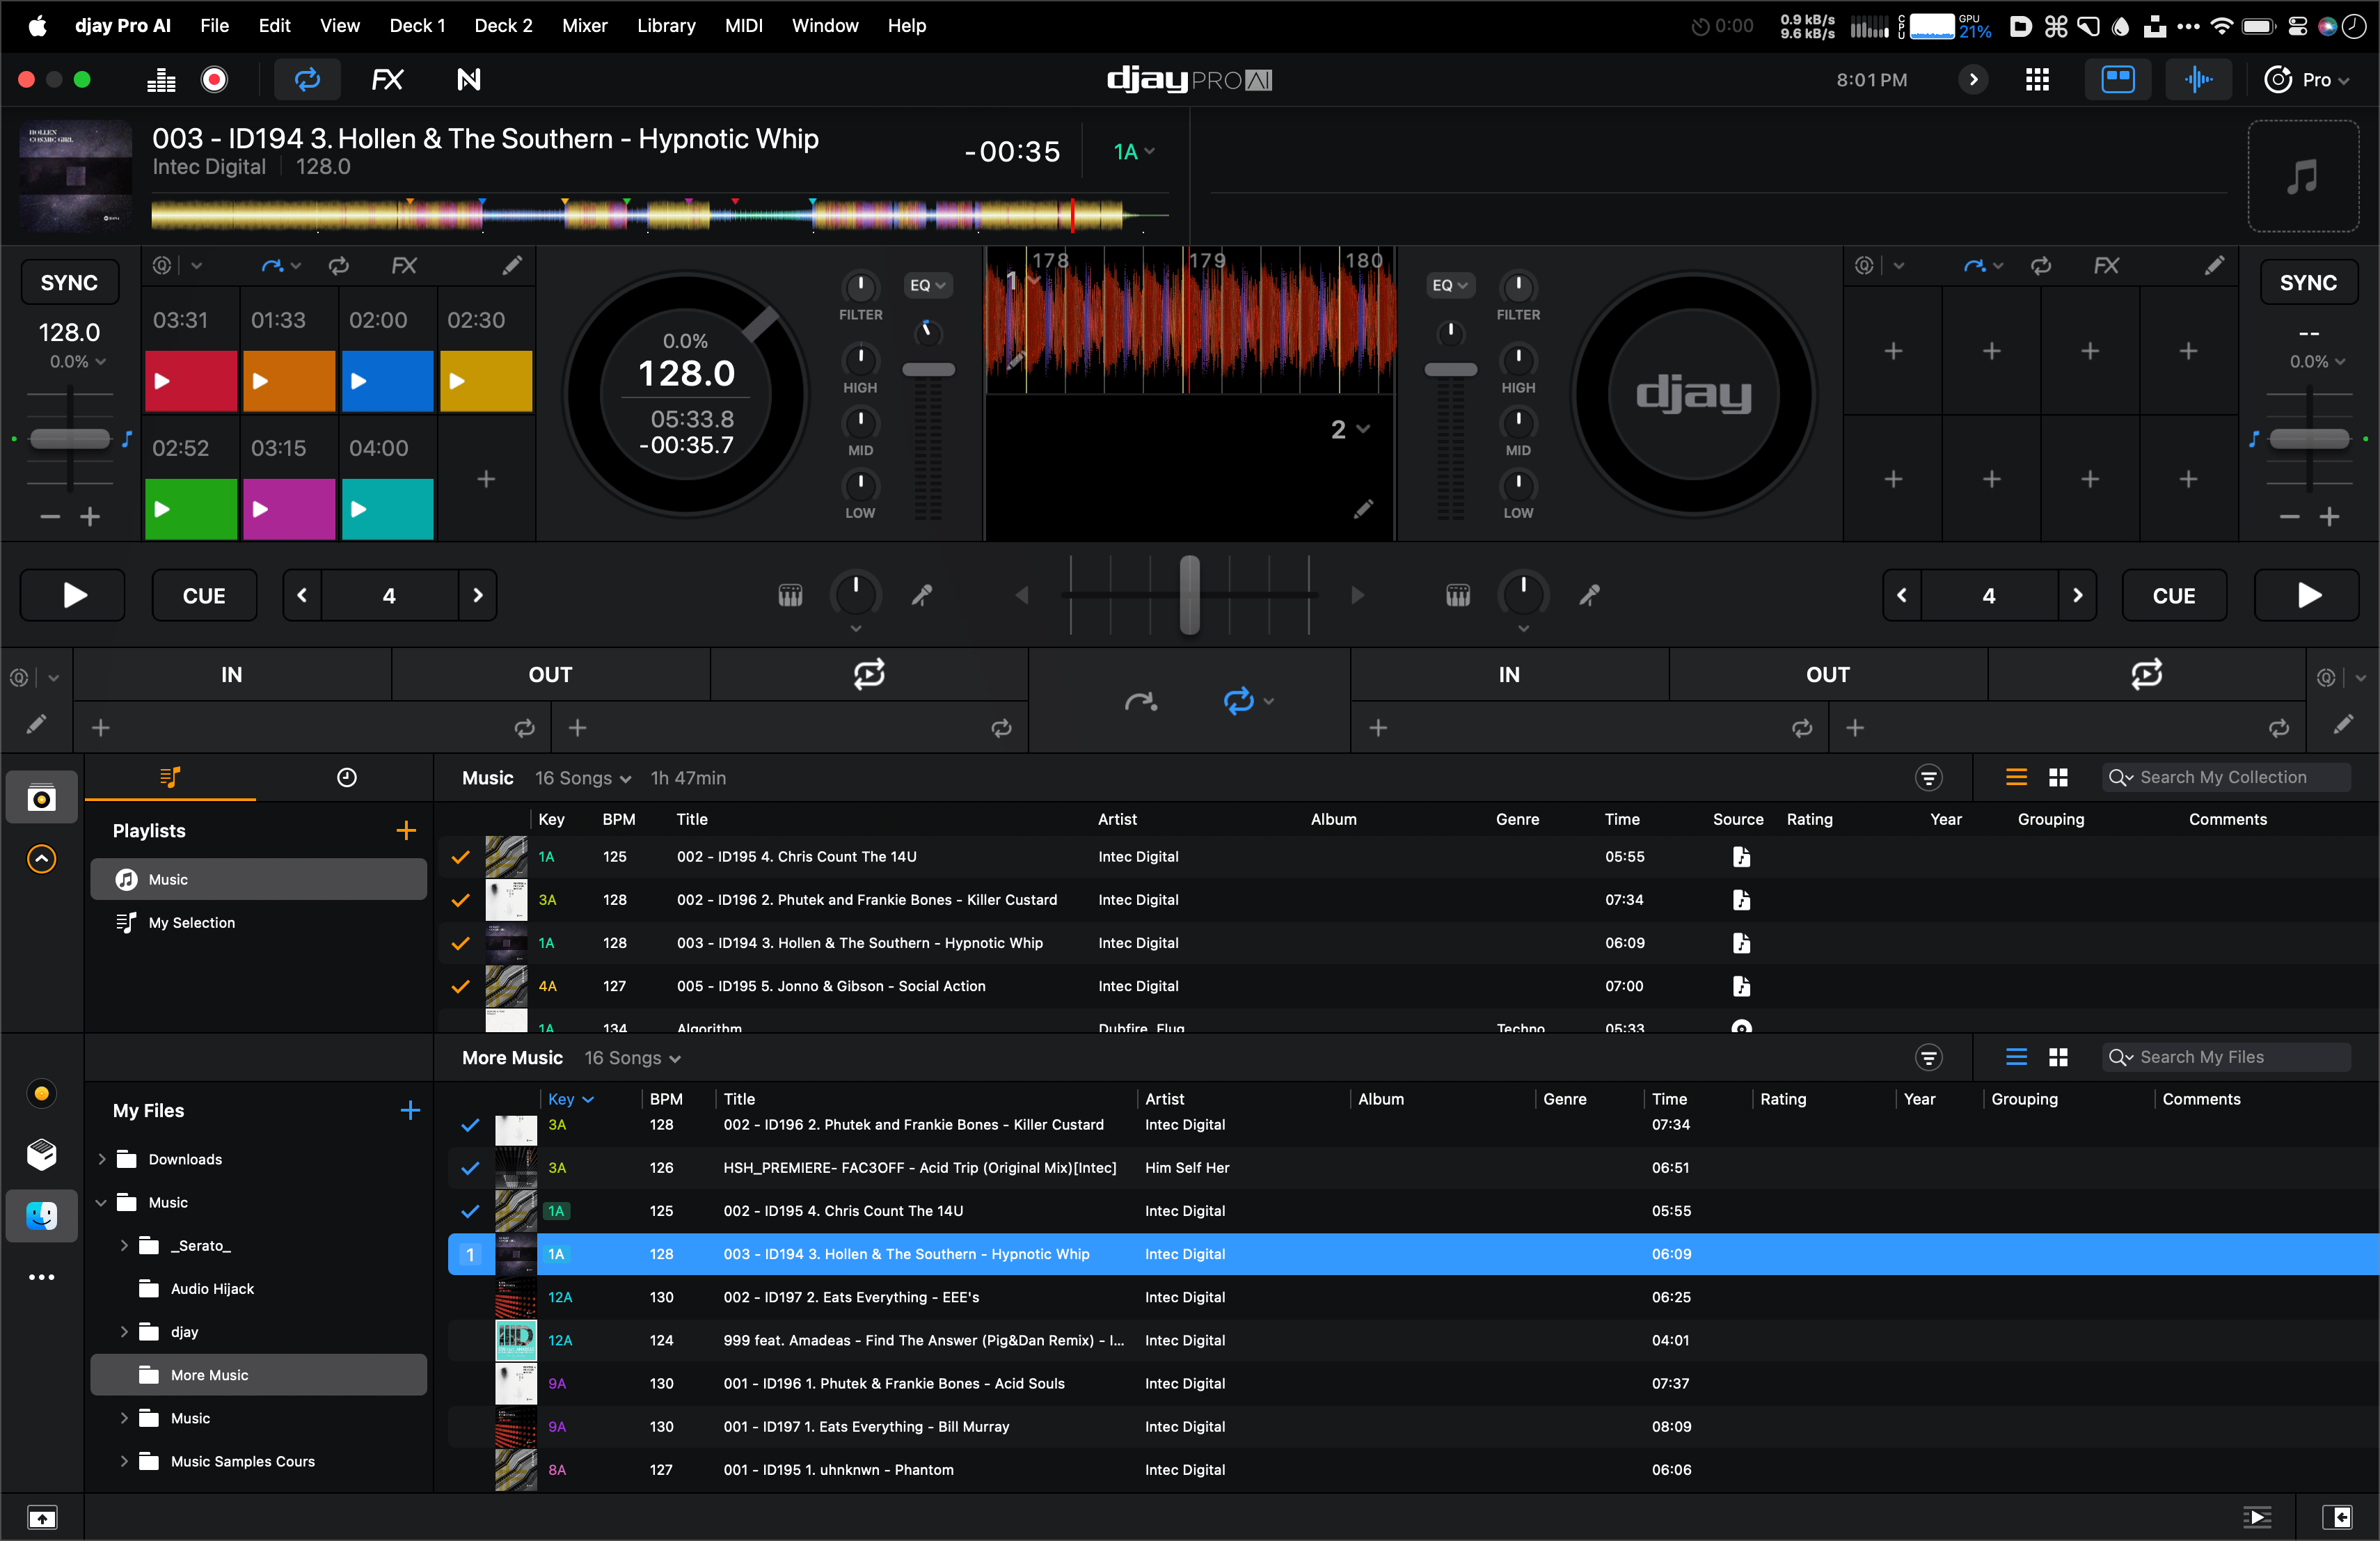 A typical view of Djay while listening to new music and building the music library (this is version 4).